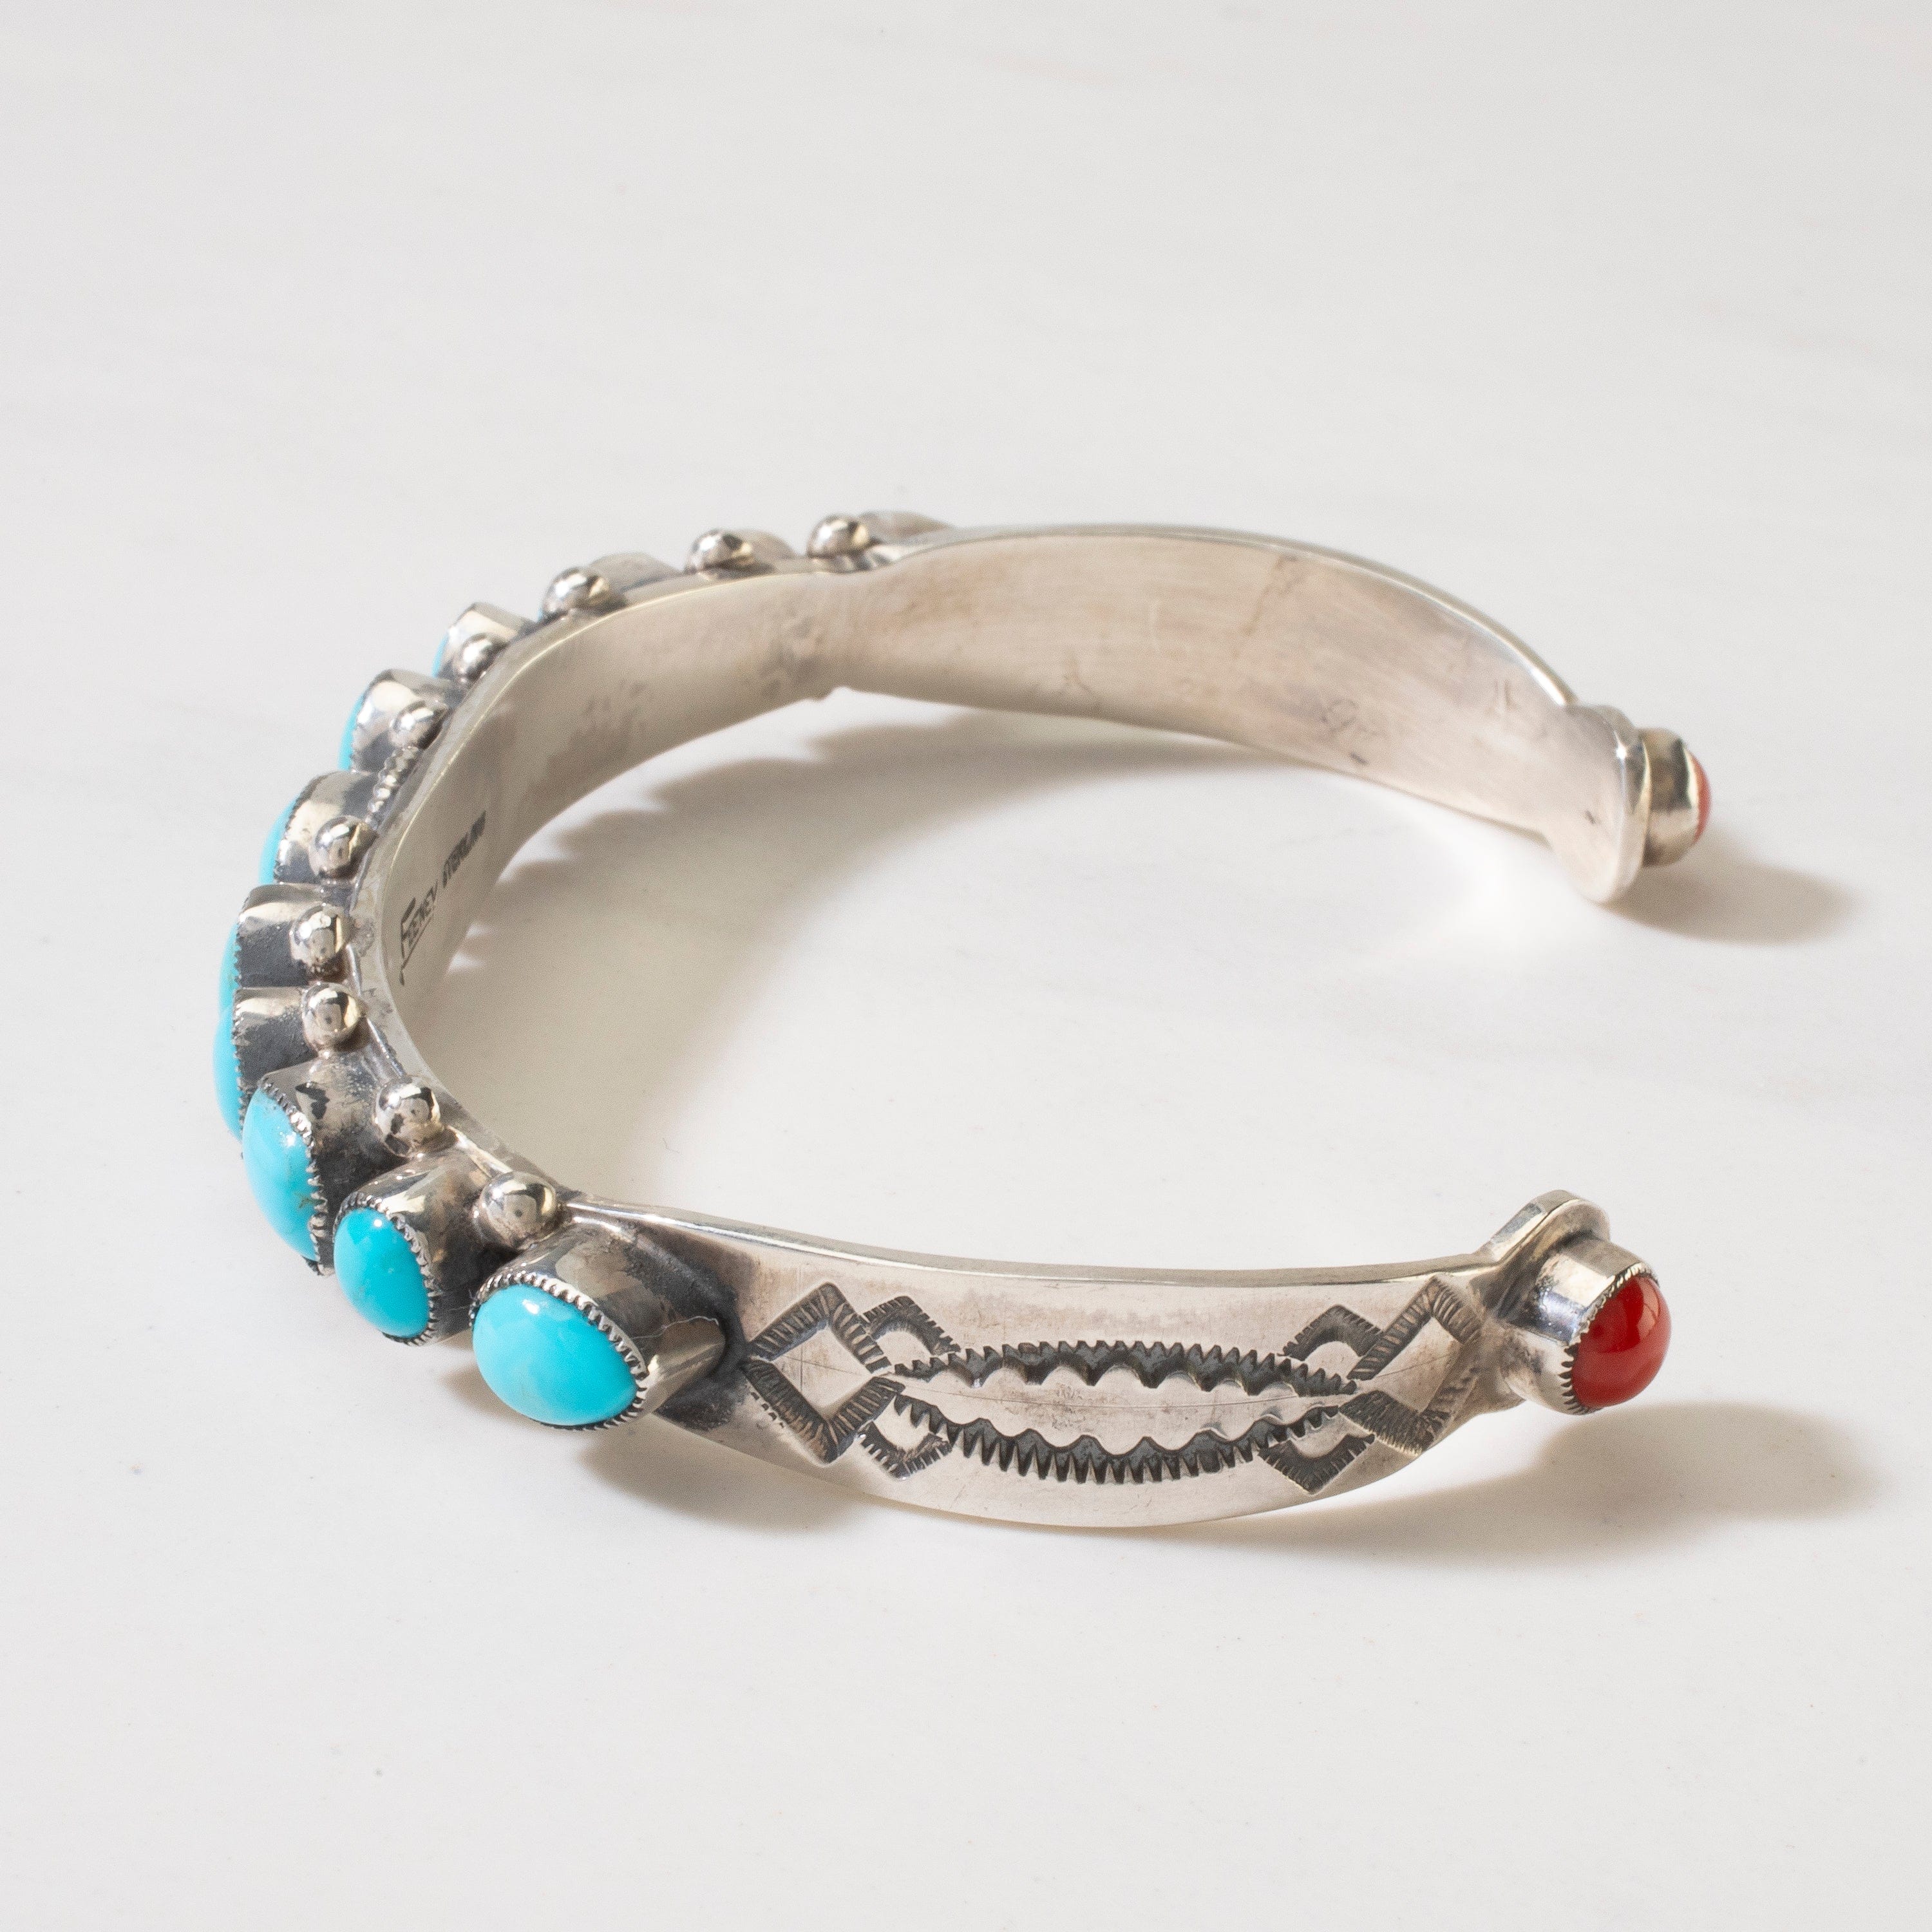 Kalifano Native American Jewelry Leo Feeney Navajo Sleeping Beauty Turquoise & Red Coral USA Native American Made 925 Sterling Silver Cuff NAB1800.029